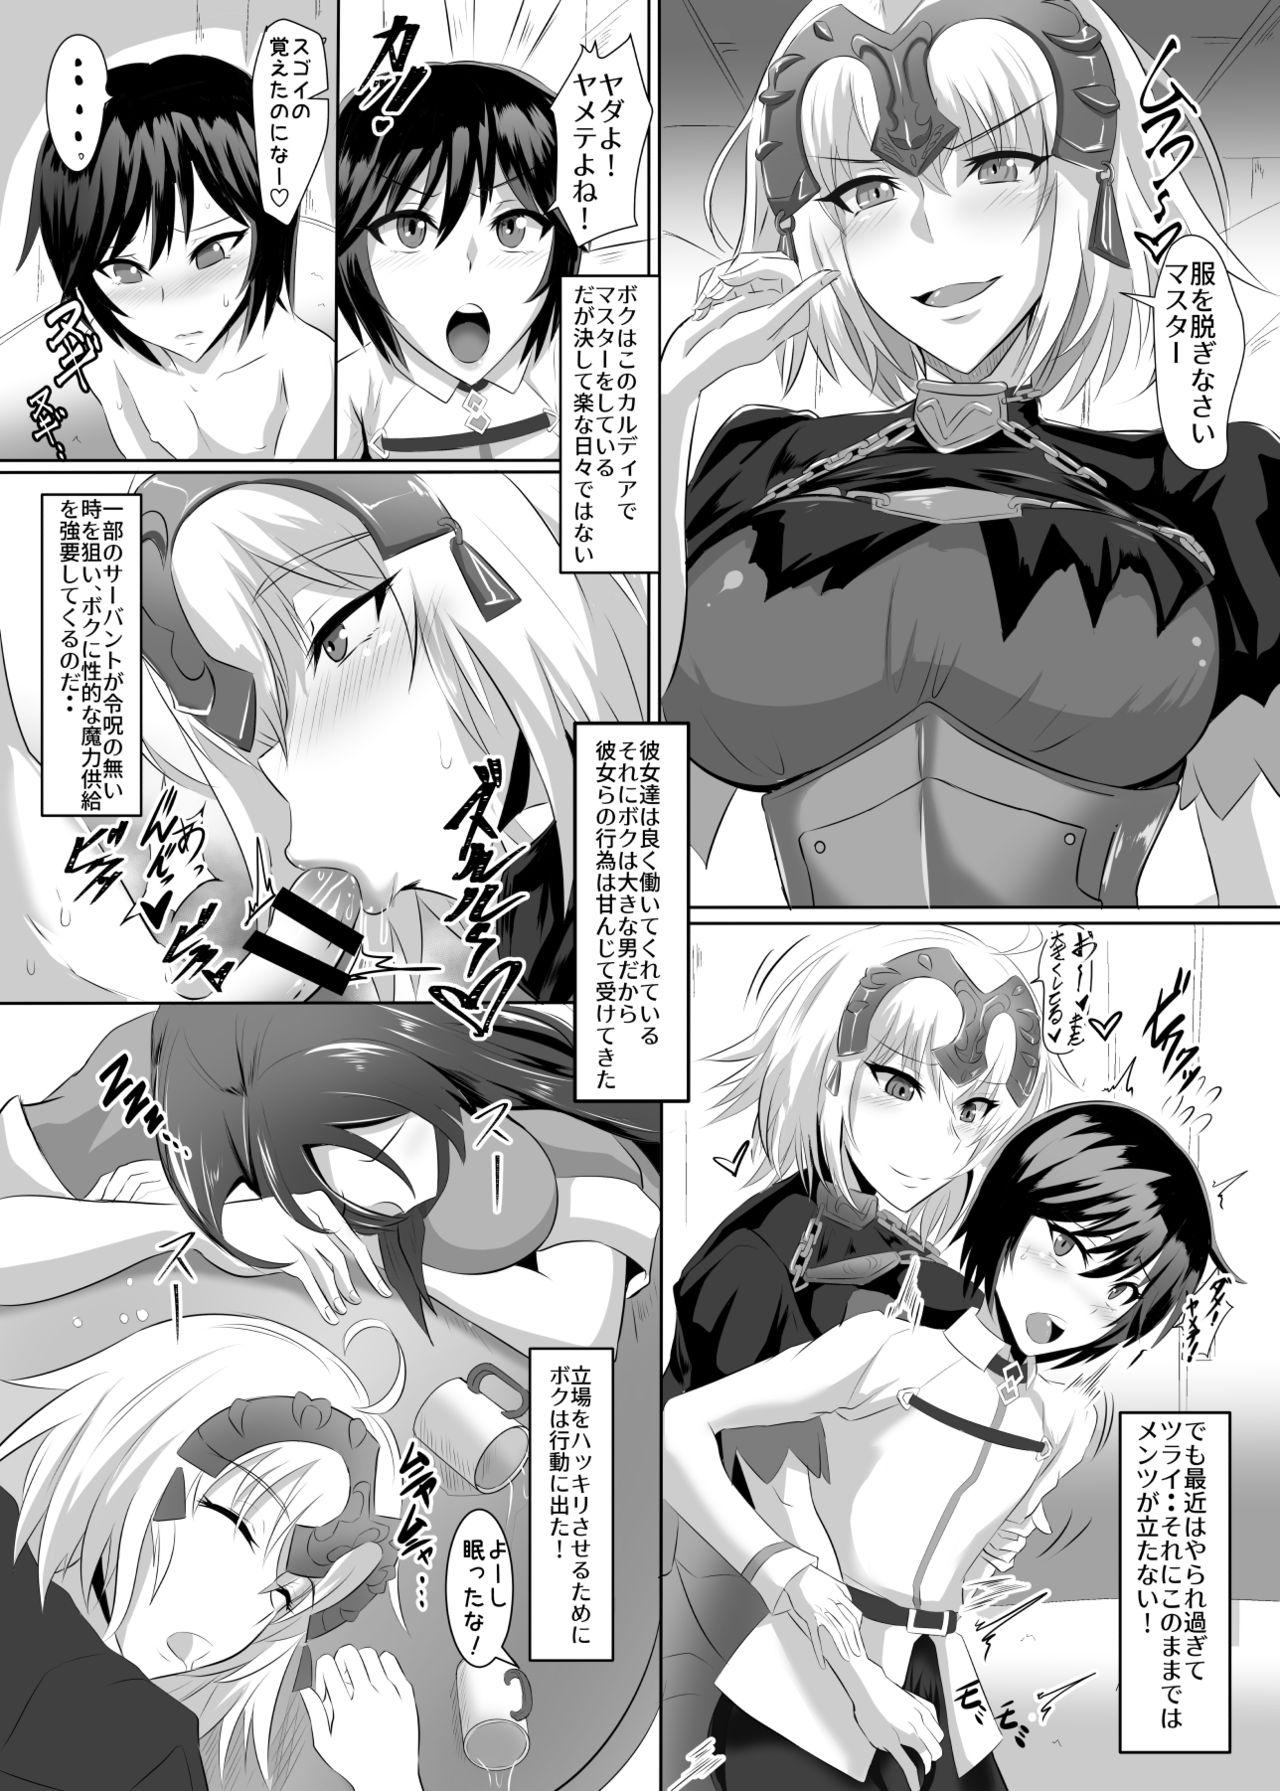 Amateur Gehenna 7 - Fate grand order Gloryholes - Page 4